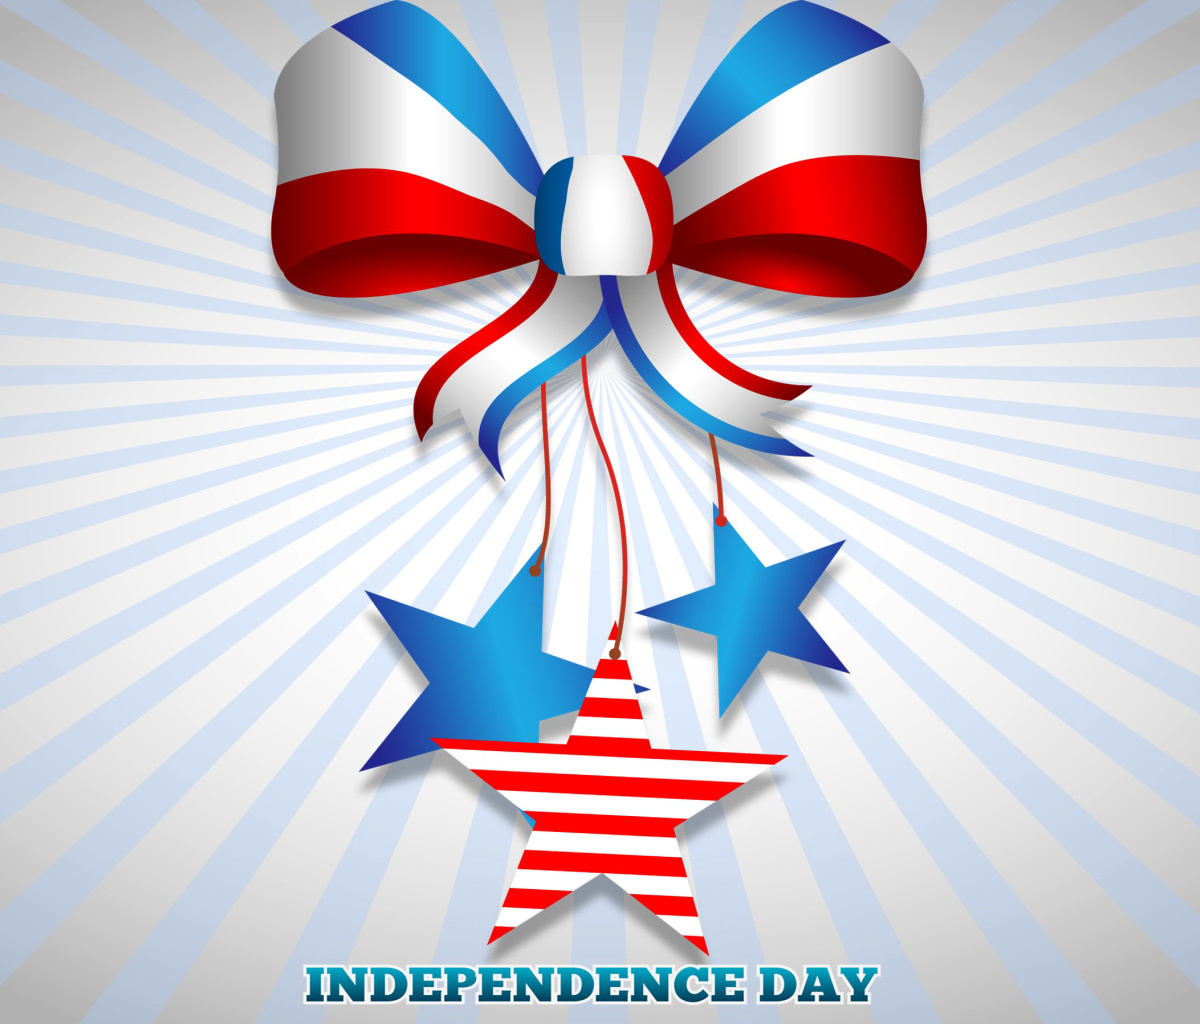 United states america Idependence day 4th july wallpaper 1200x1024